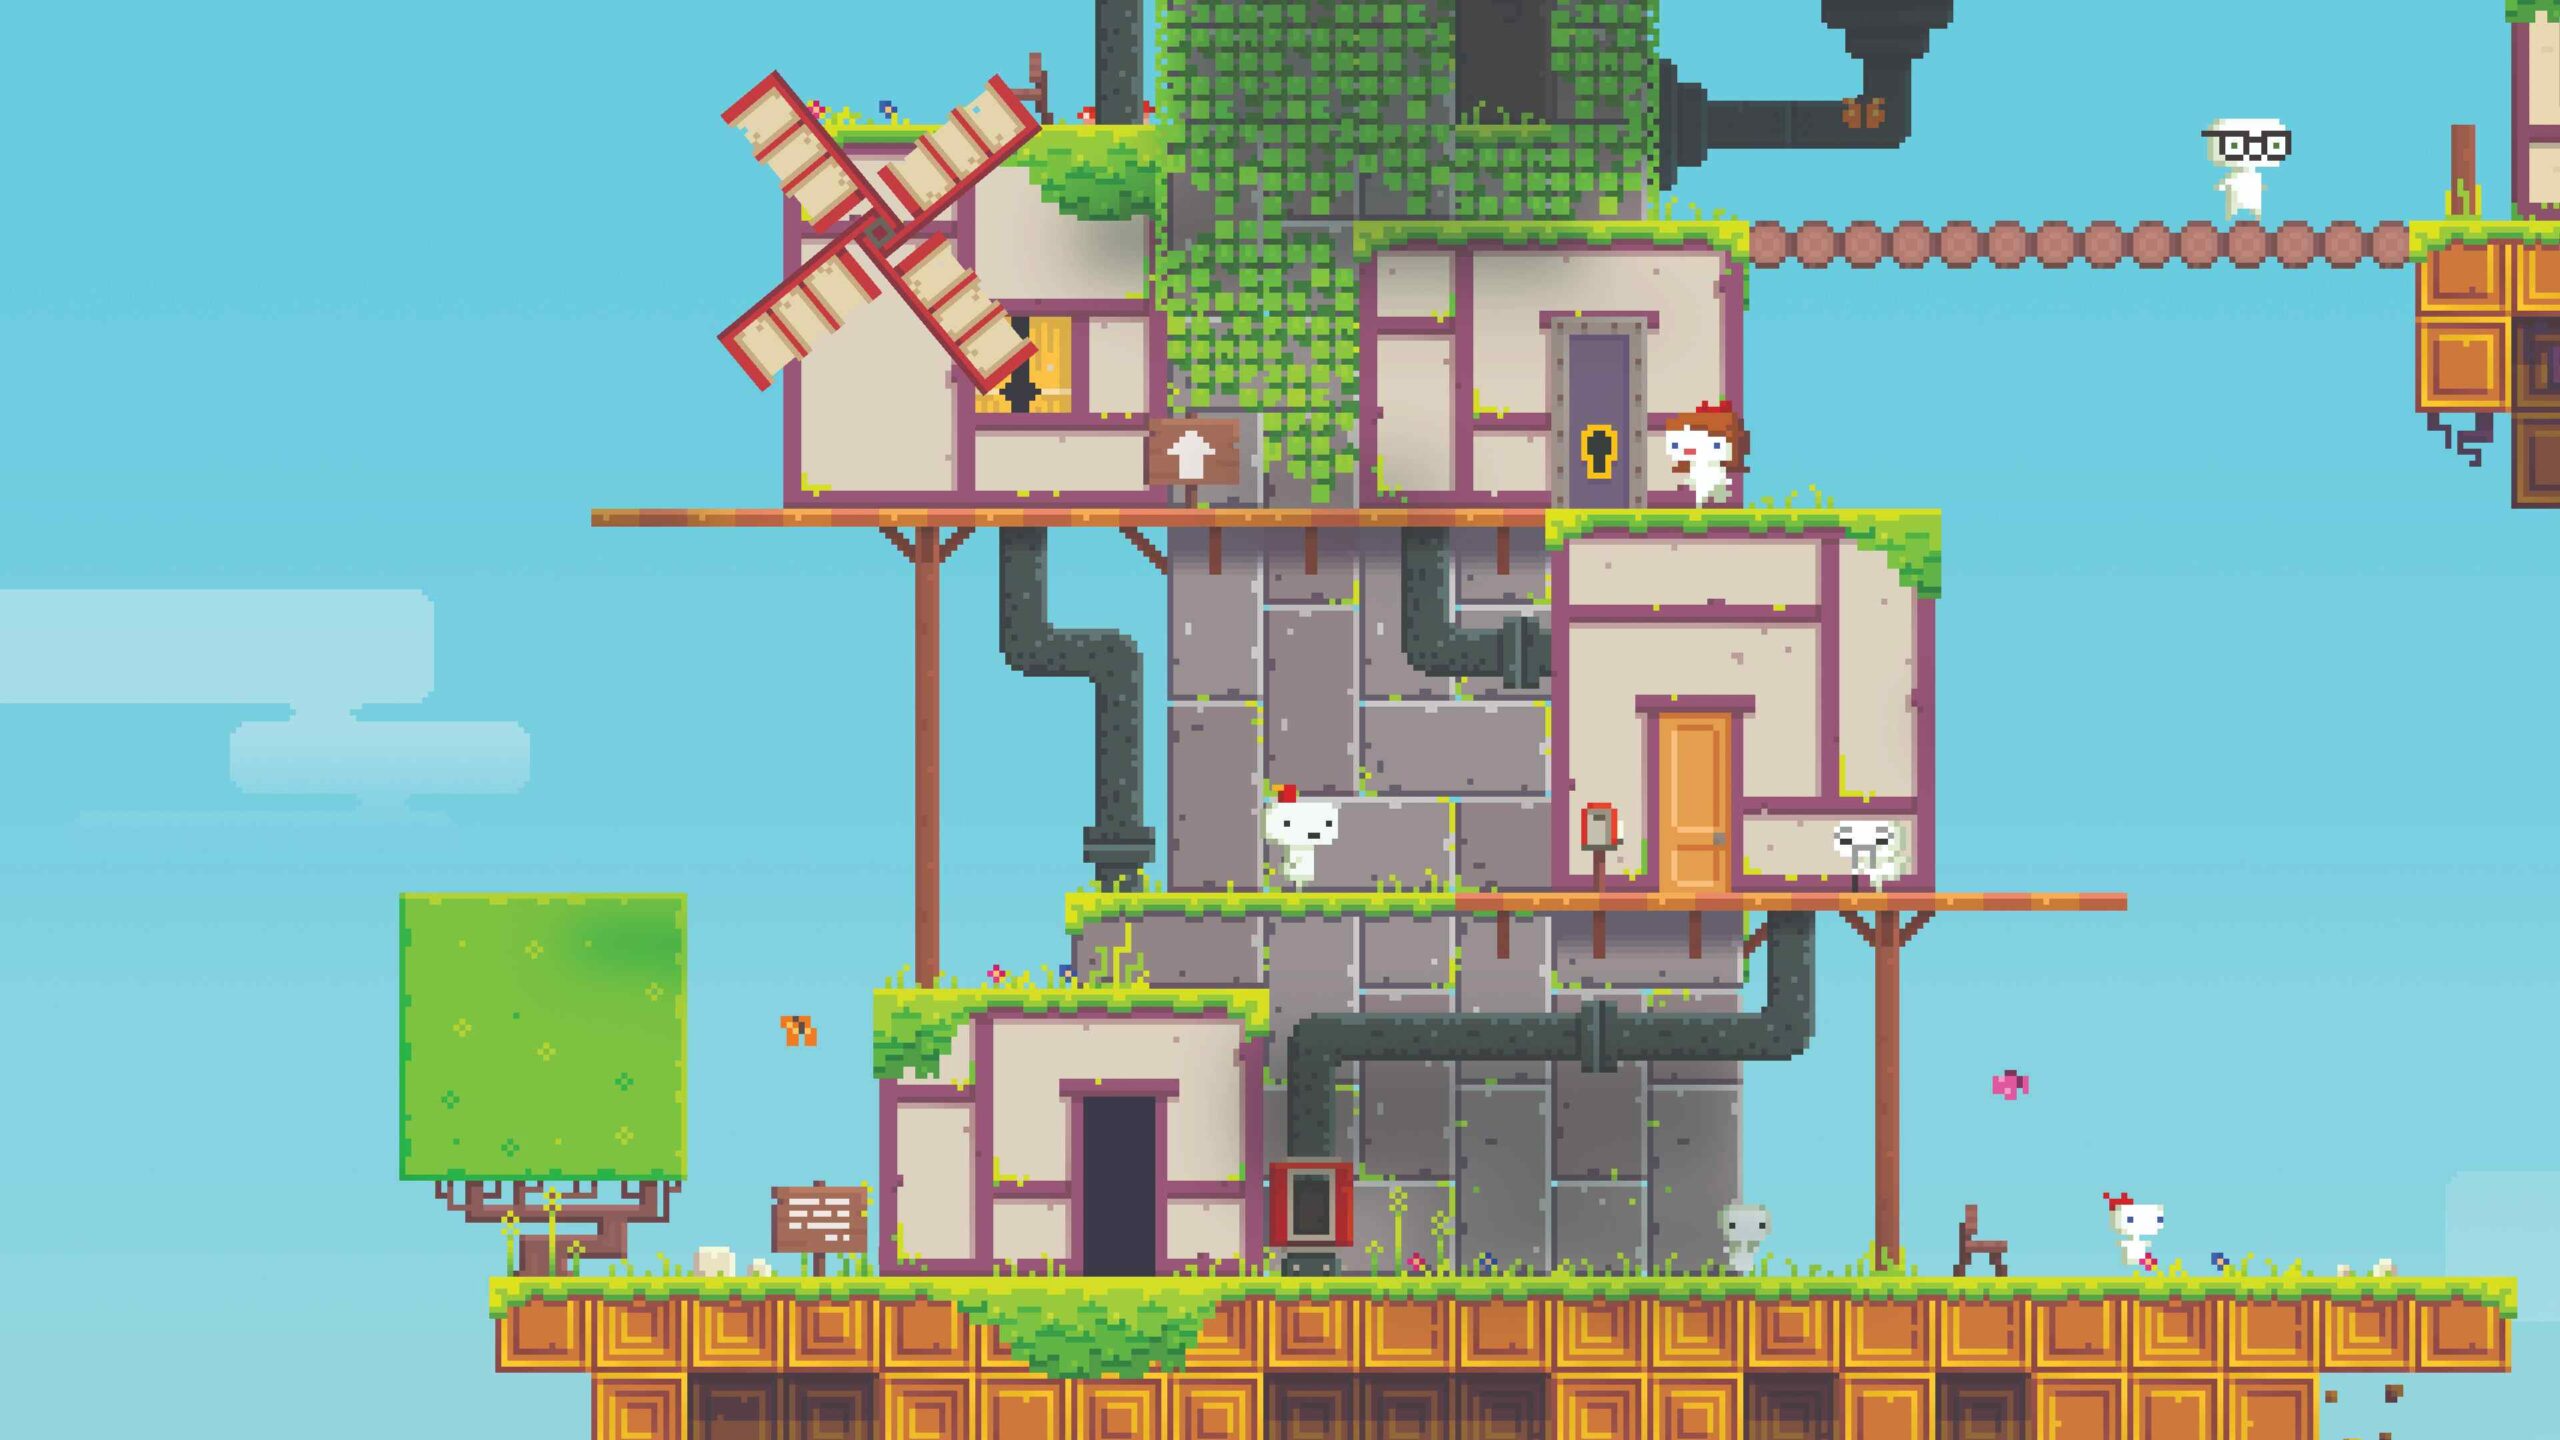 Fez is a puzzle platform game made by Polytron Corporation in 2012.